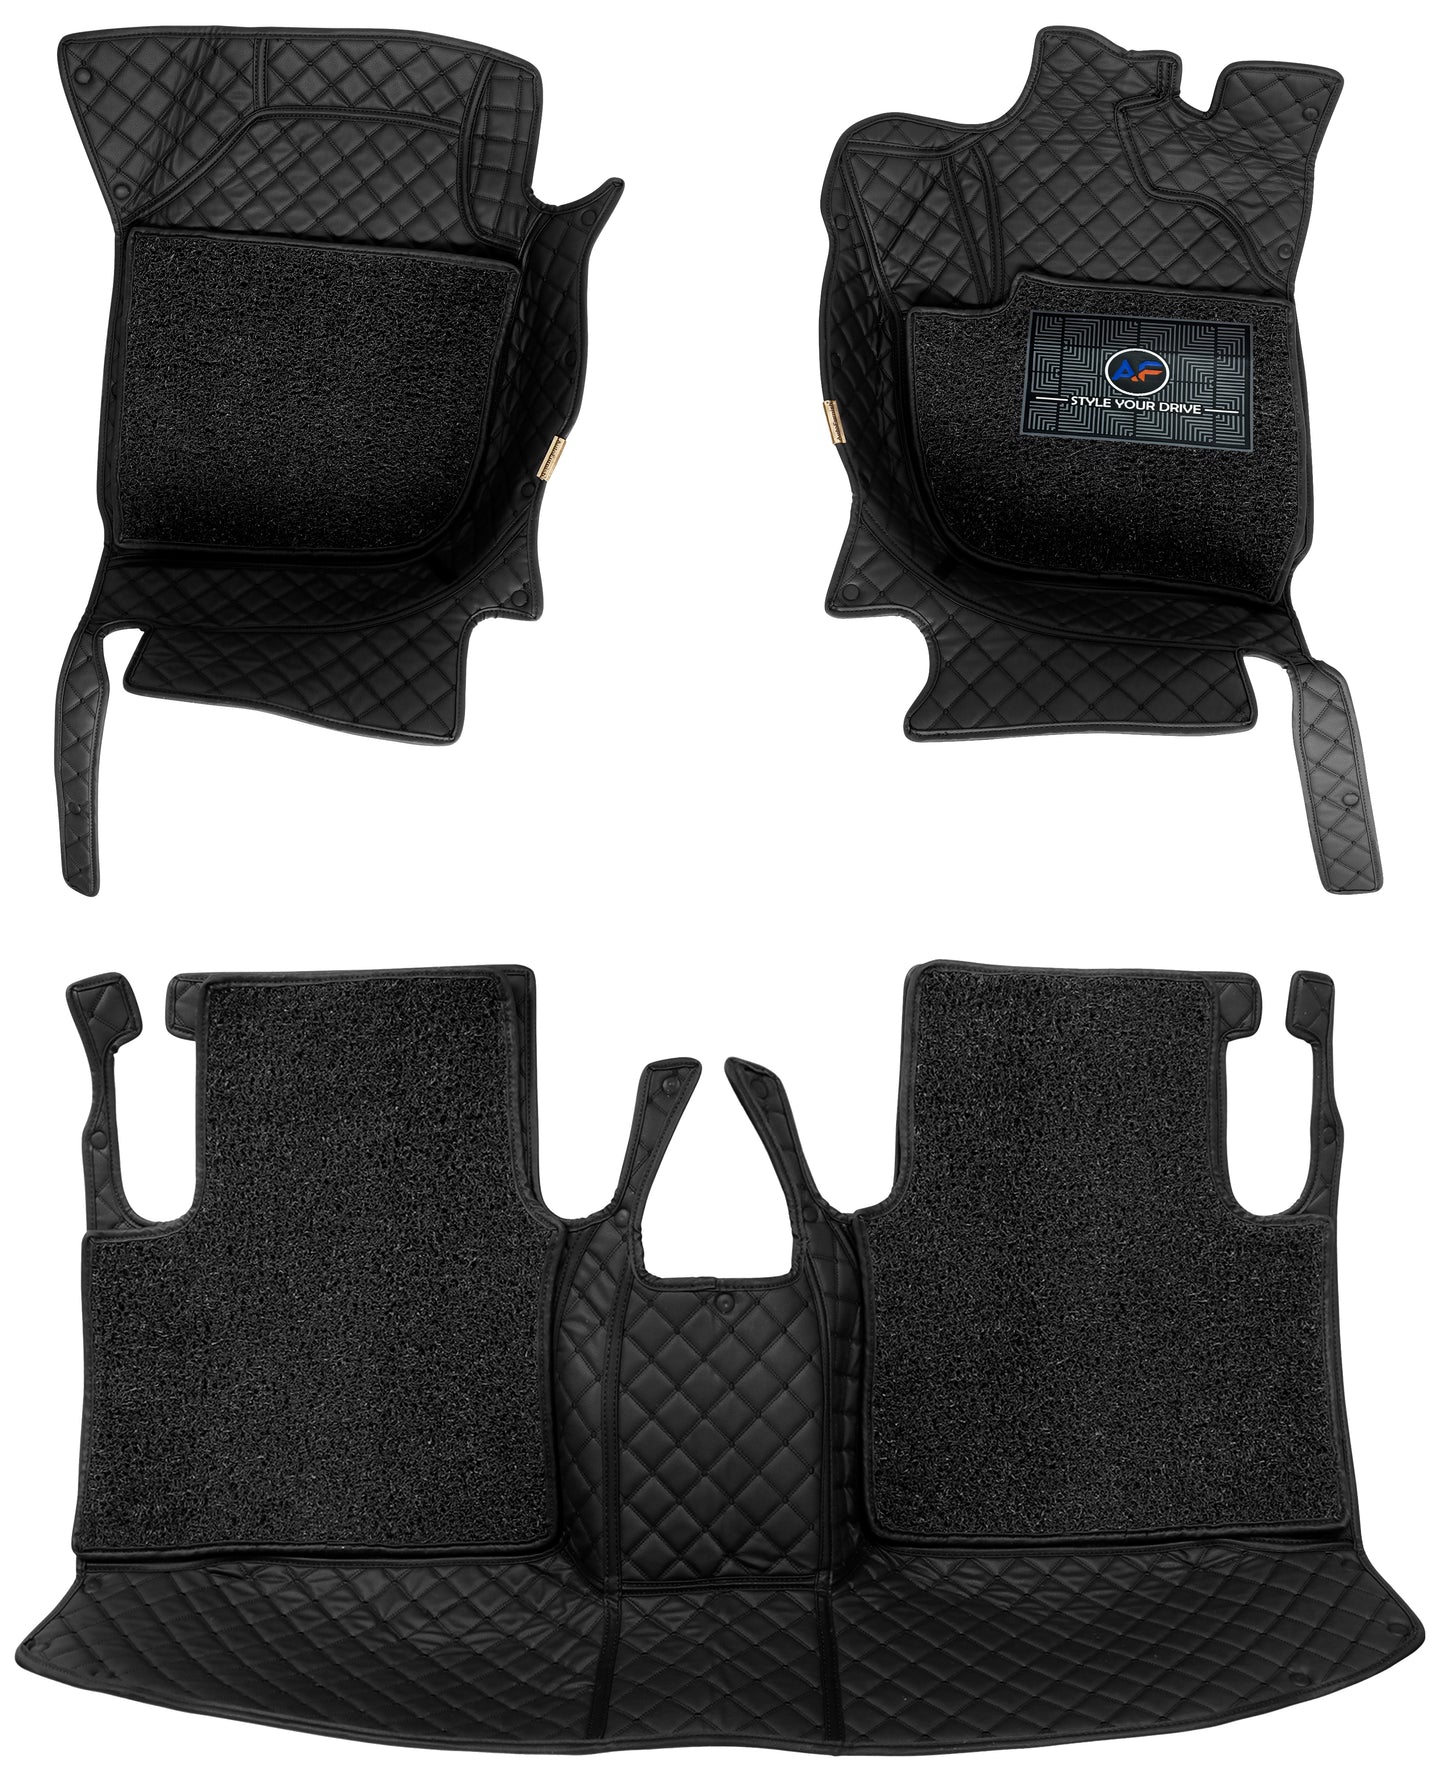 Hyundai Alcazar (7 Seater) 2021 7D Luxury Car Mat, All Weather Proof, Anti-Skid, 100% Waterproof & Odorless with Unique Diamond Fish Design (24mm Luxury PU Leather, 2 Rows)